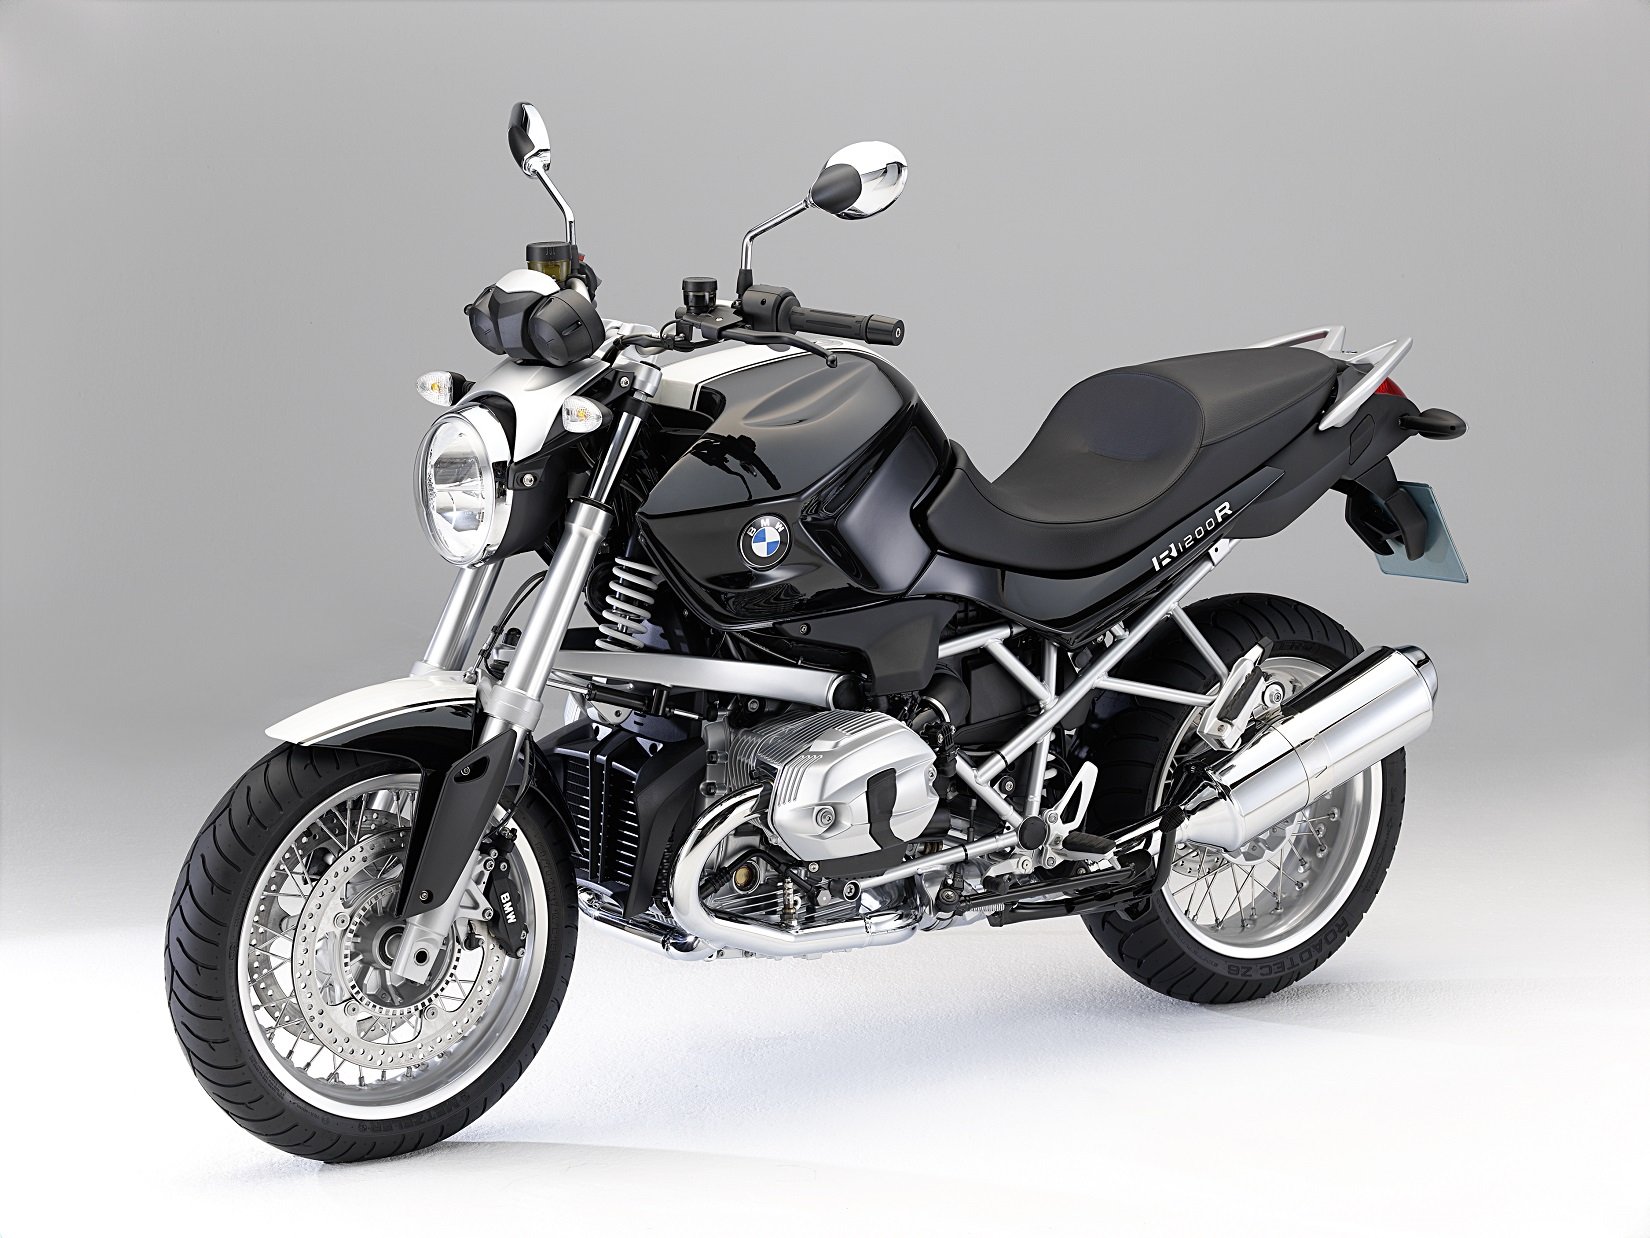 bmw, R 1200 r, Classic, Motorcycles, 2010 Wallpapers HD / Desktop and